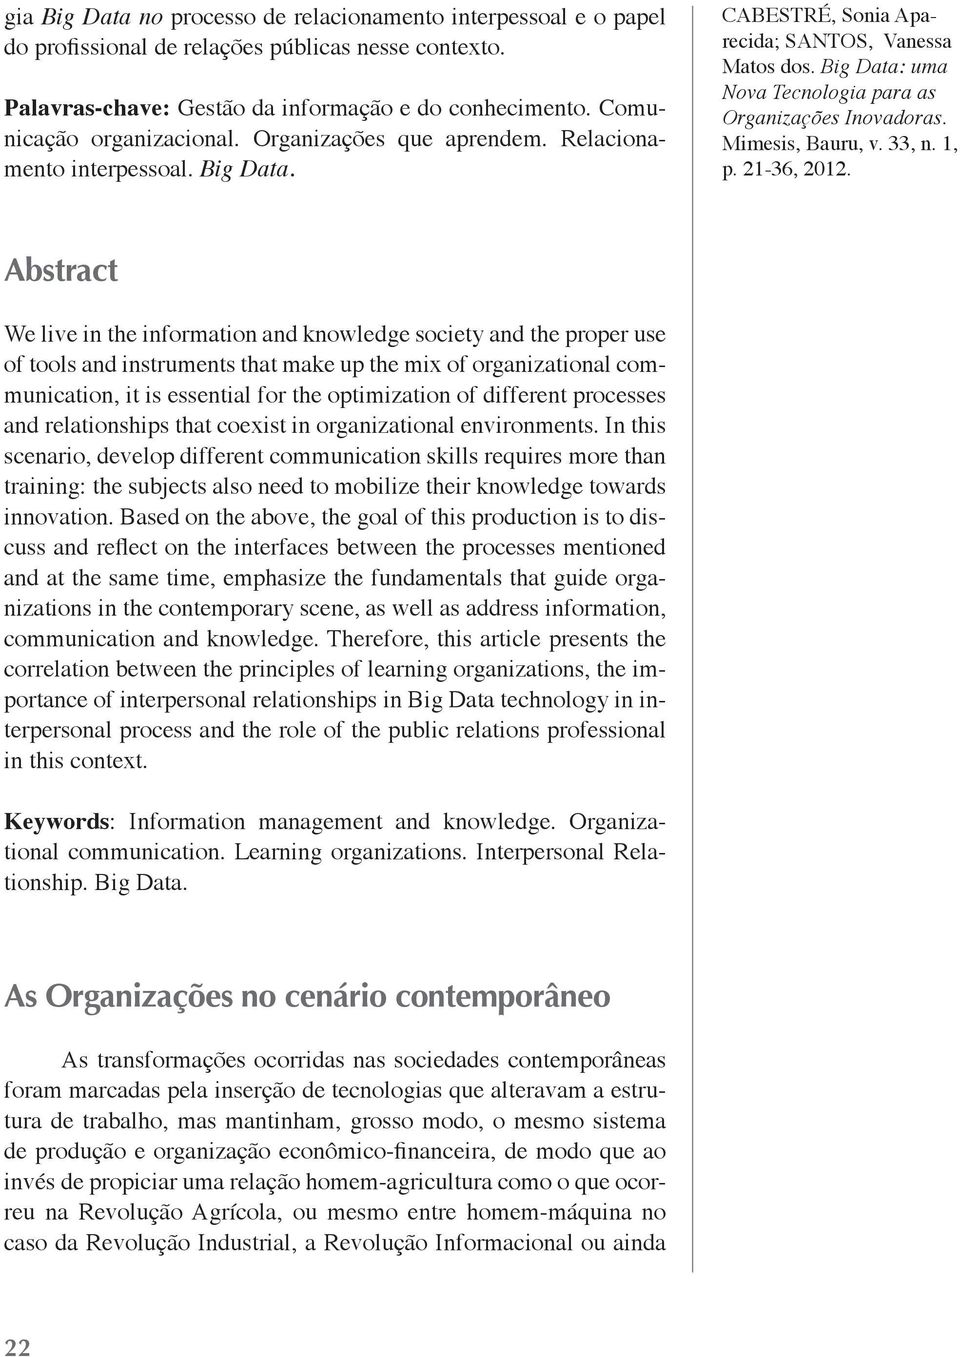 CABESTRÉ, Sonia Aparecida; Abstract We live in the information and knowledge society and the proper use of tools and instruments that make up the mix of organizational communication, it is essential